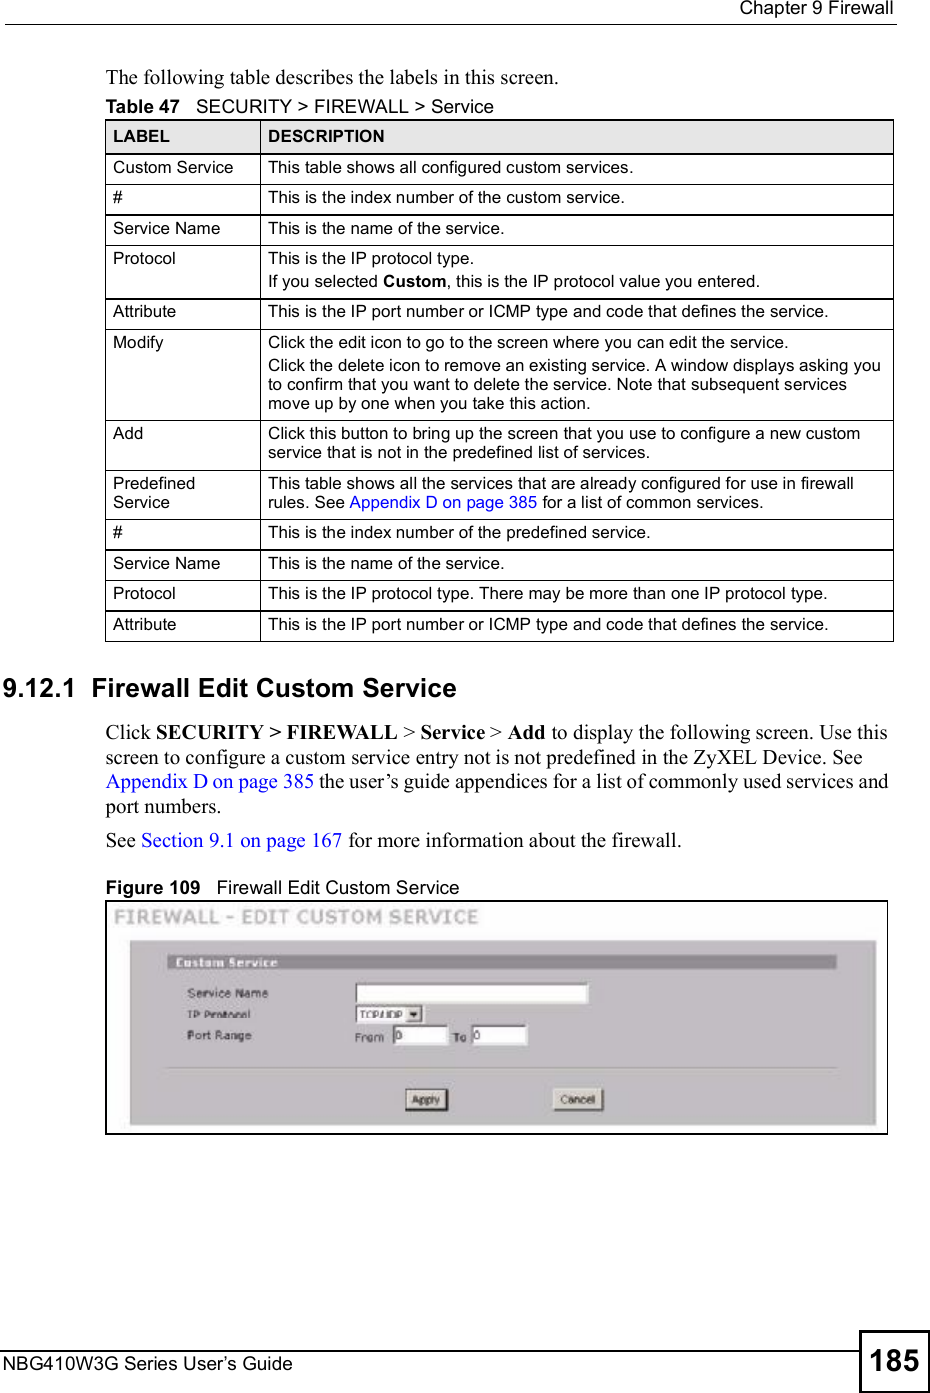  Chapter 9FirewallNBG410W3G Series User s Guide 185The following table describes the labels in this screen.  9.12.1  Firewall Edit Custom Service Click SECURITY &gt; FIREWALL &gt; Service &gt; Add to display the following screen. Use this screen to configure a custom service entry not is not predefined in the ZyXEL Device. See Appendix D on page 385 the user!s guide appendices for a list of commonly used services and port numbers.   See Section 9.1 on page 167 for more information about the firewall.Figure 109   Firewall Edit Custom ServiceTable 47   SECURITY &gt; FIREWALL &gt; ServiceLABEL DESCRIPTIONCustom ServiceThis table shows all configured custom services.#This is the index number of the custom service.Service NameThis is the name of the service.ProtocolThis is the IP protocol type.If you selected Custom, this is the IP protocol value you entered.AttributeThis is the IP port number or ICMP type and code that defines the service.ModifyClick the edit icon to go to the screen where you can edit the service.Click the delete icon to remove an existing service. A window displays asking you to confirm that you want to delete the service. Note that subsequent services move up by one when you take this action.AddClick this button to bring up the screen that you use to configure a new custom service that is not in the predefined list of services.Predefined ServiceThis table shows all the services that are already configured for use in firewall rules. See Appendix D on page 385 for a list of common services.#This is the index number of the predefined service.Service NameThis is the name of the service.ProtocolThis is the IP protocol type. There may be more than one IP protocol type.AttributeThis is the IP port number or ICMP type and code that defines the service. 